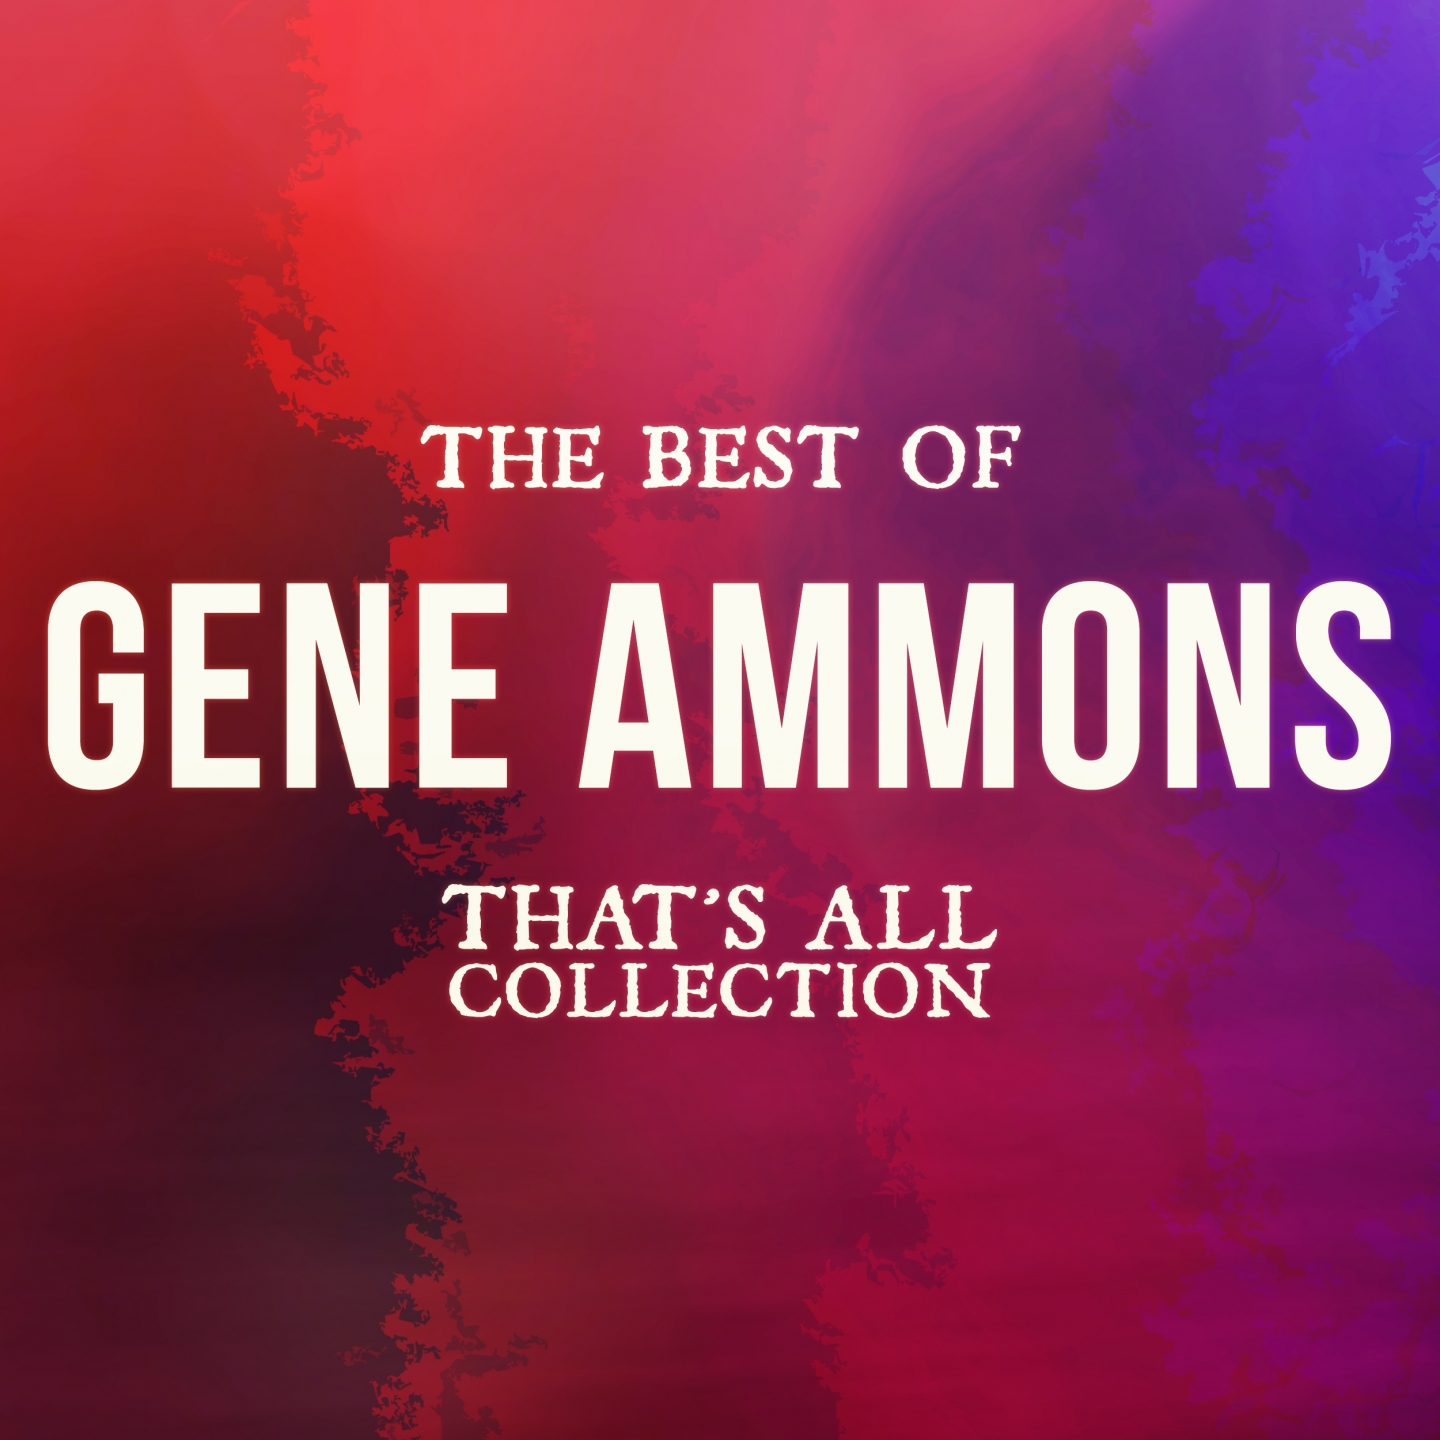 The Best of Gene Ammons (That's All Collection)